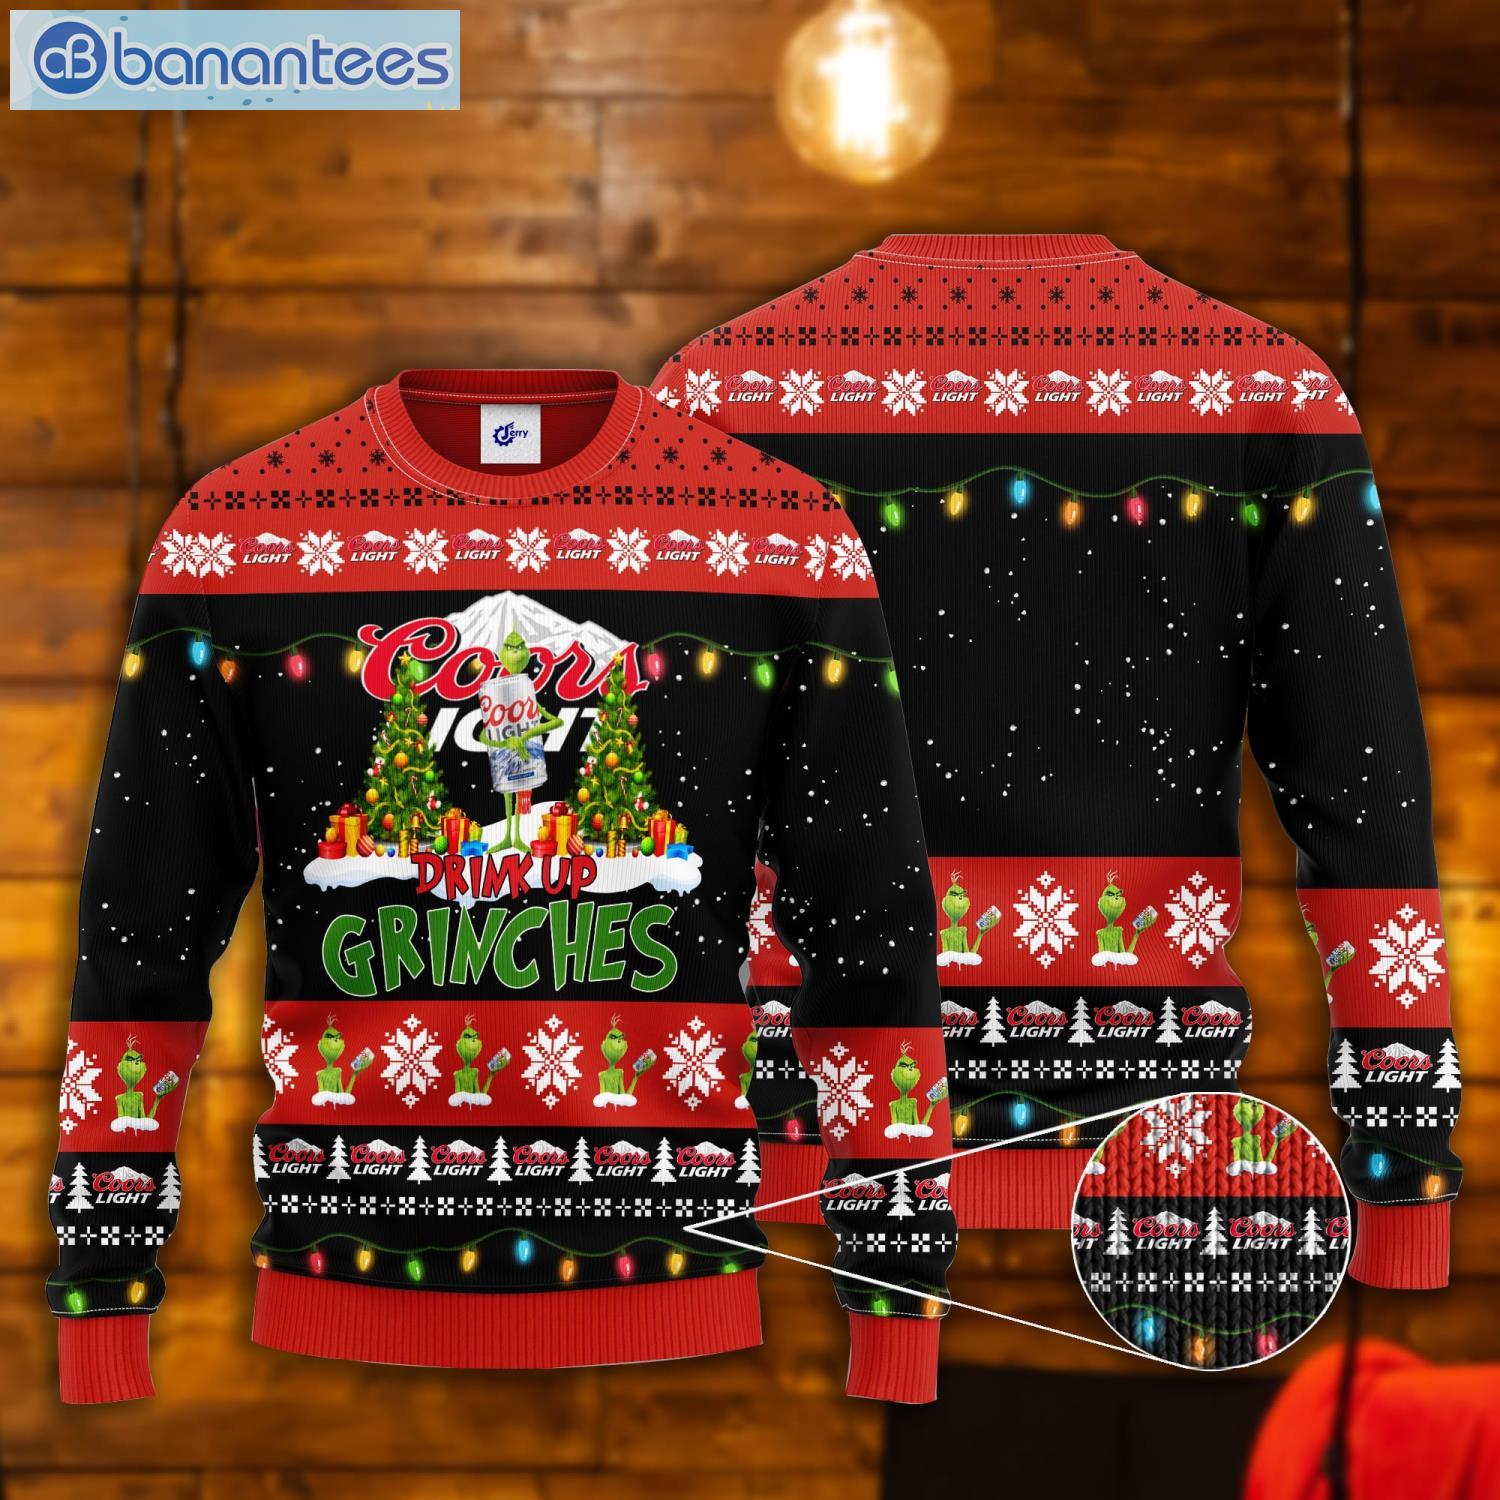 Coors Light Drink Up Grinches Ugly Christmas Sweater Product Photo 1